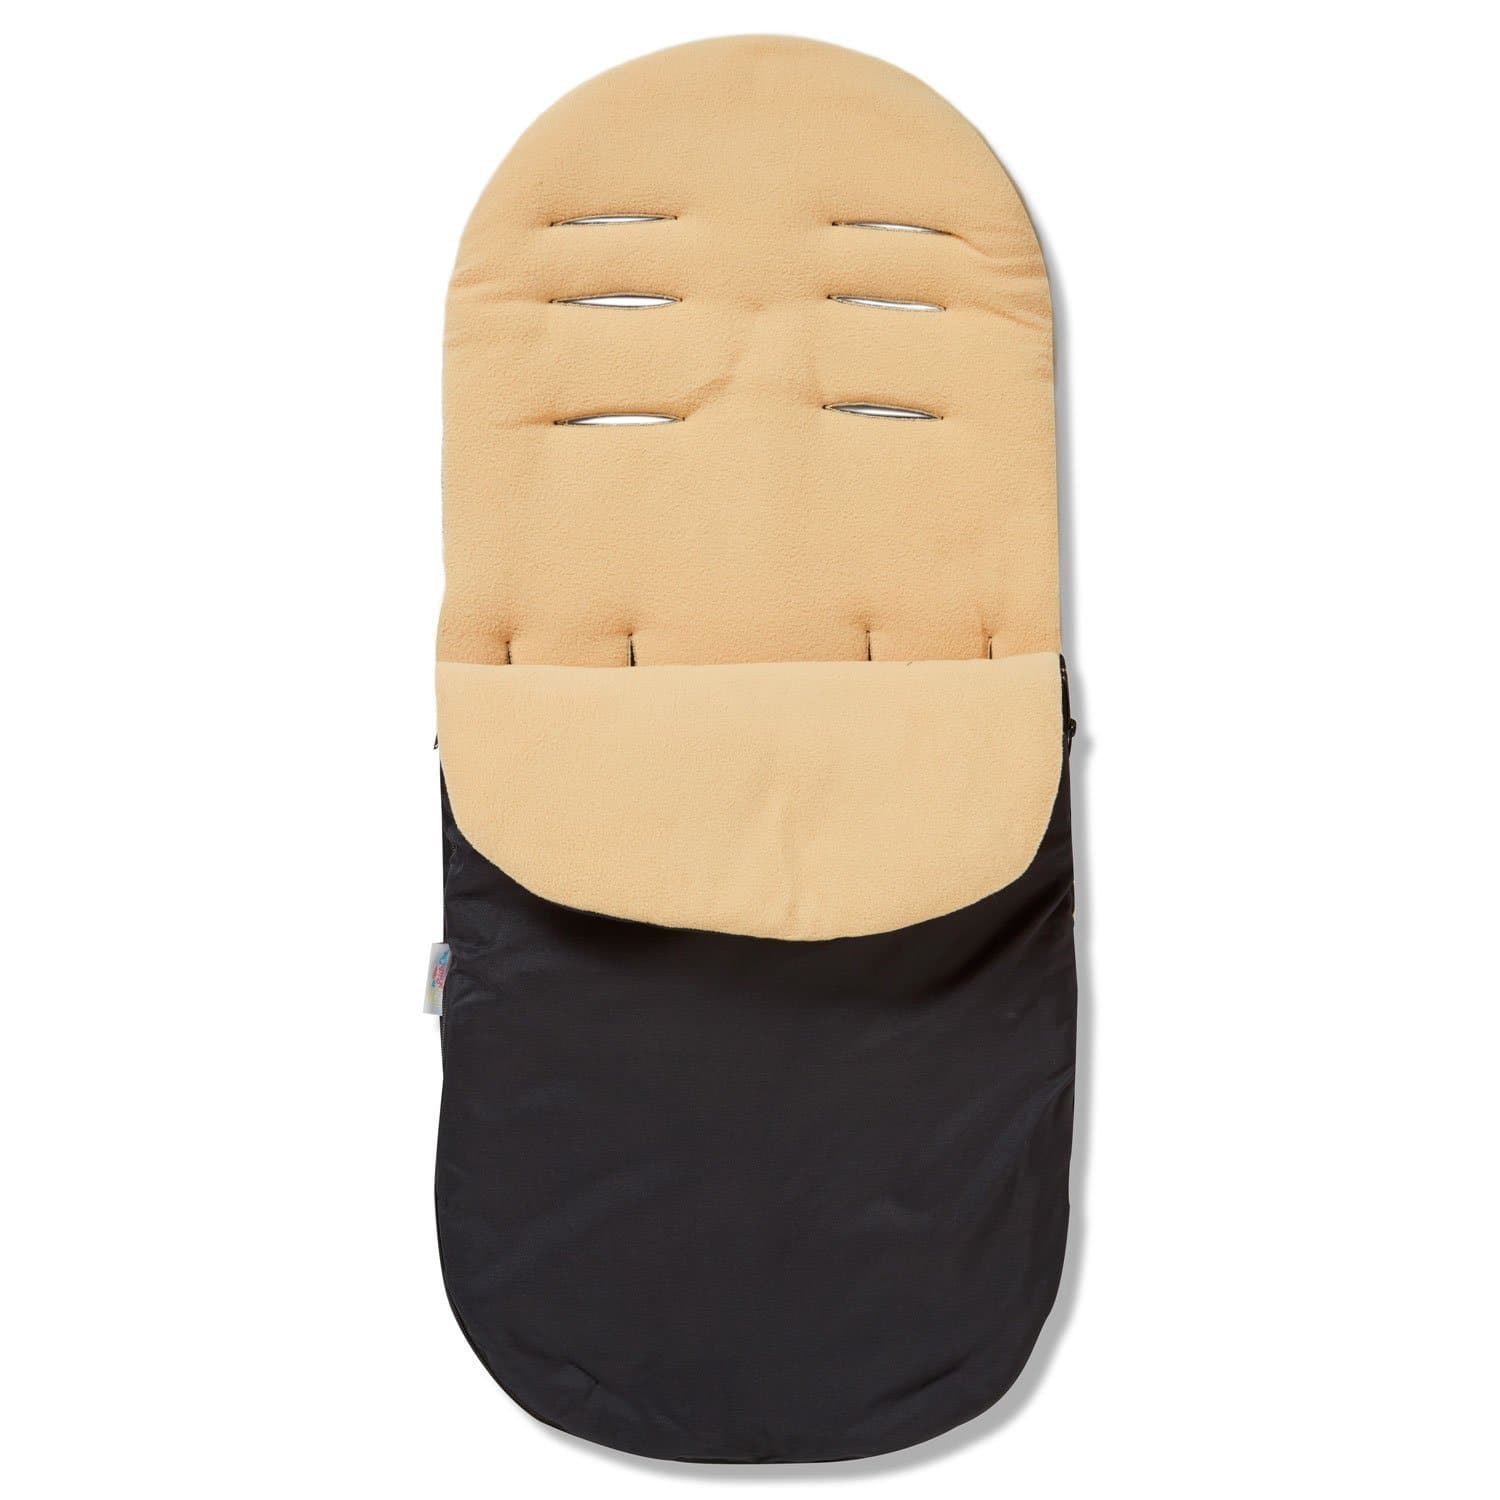 Footmuff / Cosy Toes Compatible with Cybex - Sand / Fits All Models | For Your Little One